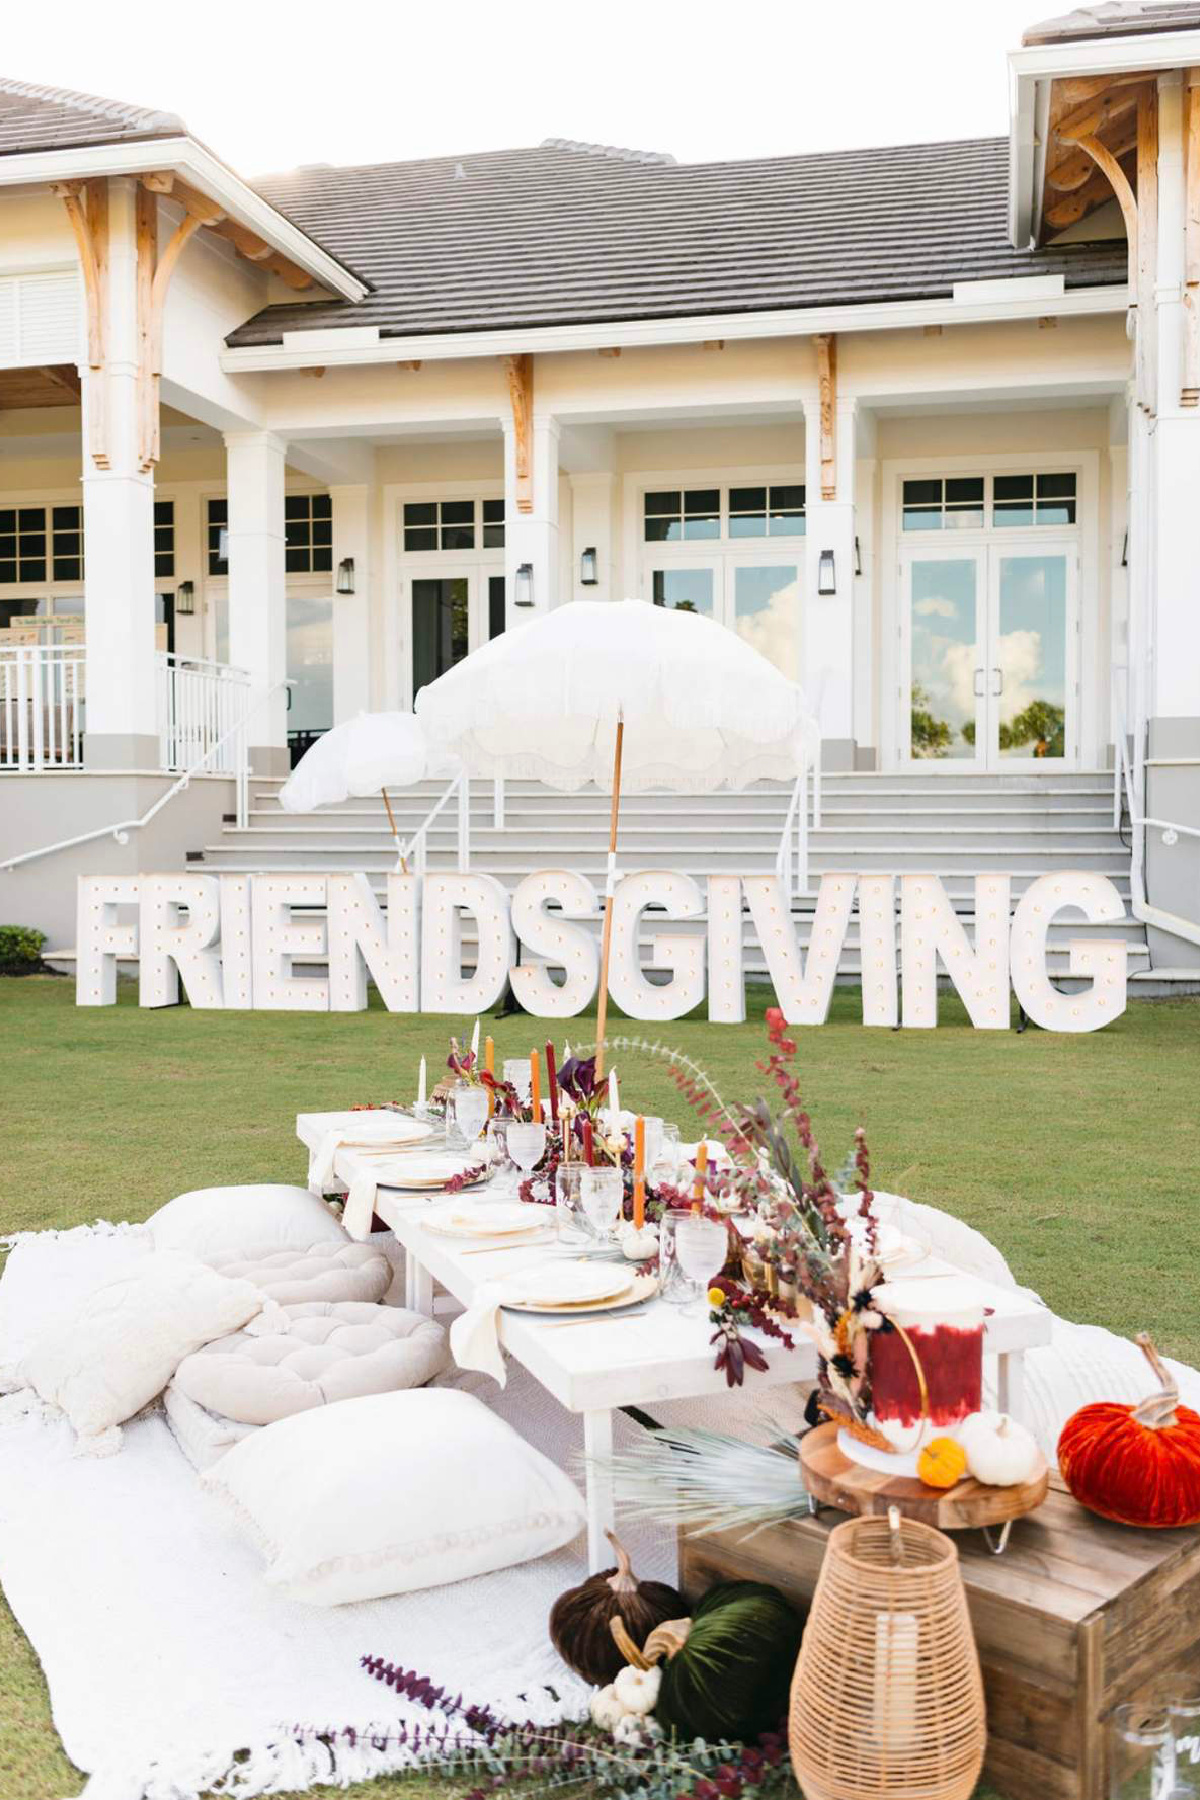 Best Party Themes for Adults  - Friendsgiving Parties